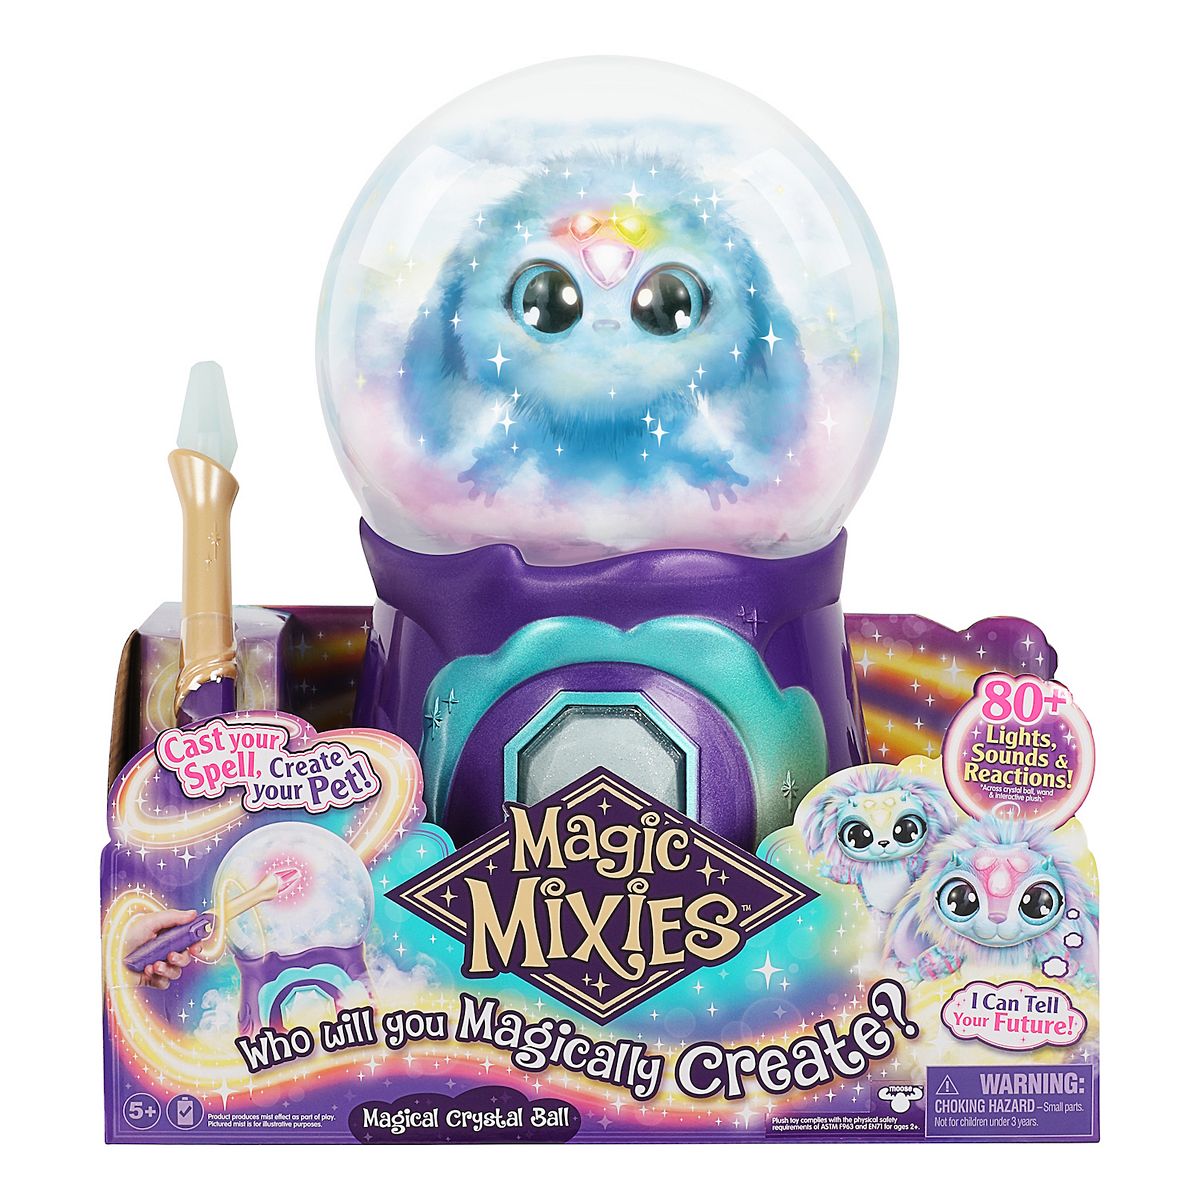 Magic Mixies Magical Misting Crystal Ball w/ 8" Plush Toy and 80+ Sounds and Reactions (Blue) $33.95 + Free Shipping